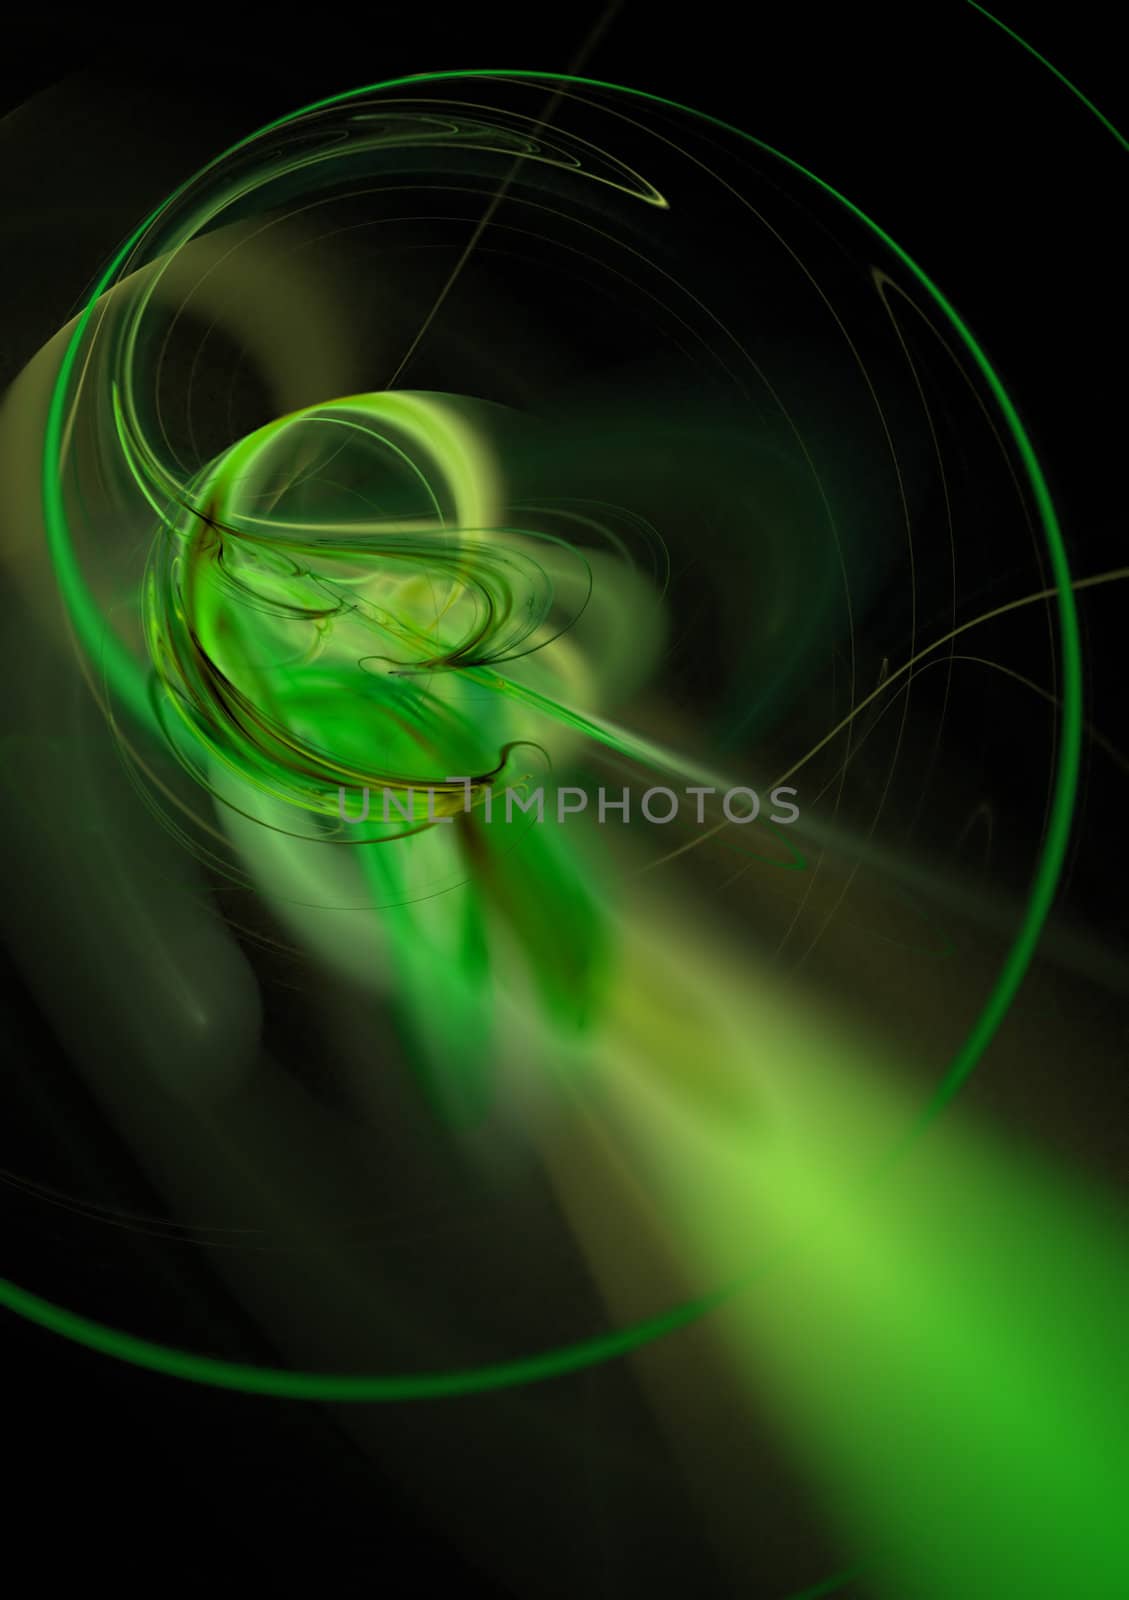 3D abstract green plasma - works great as a background or art element in any design.
